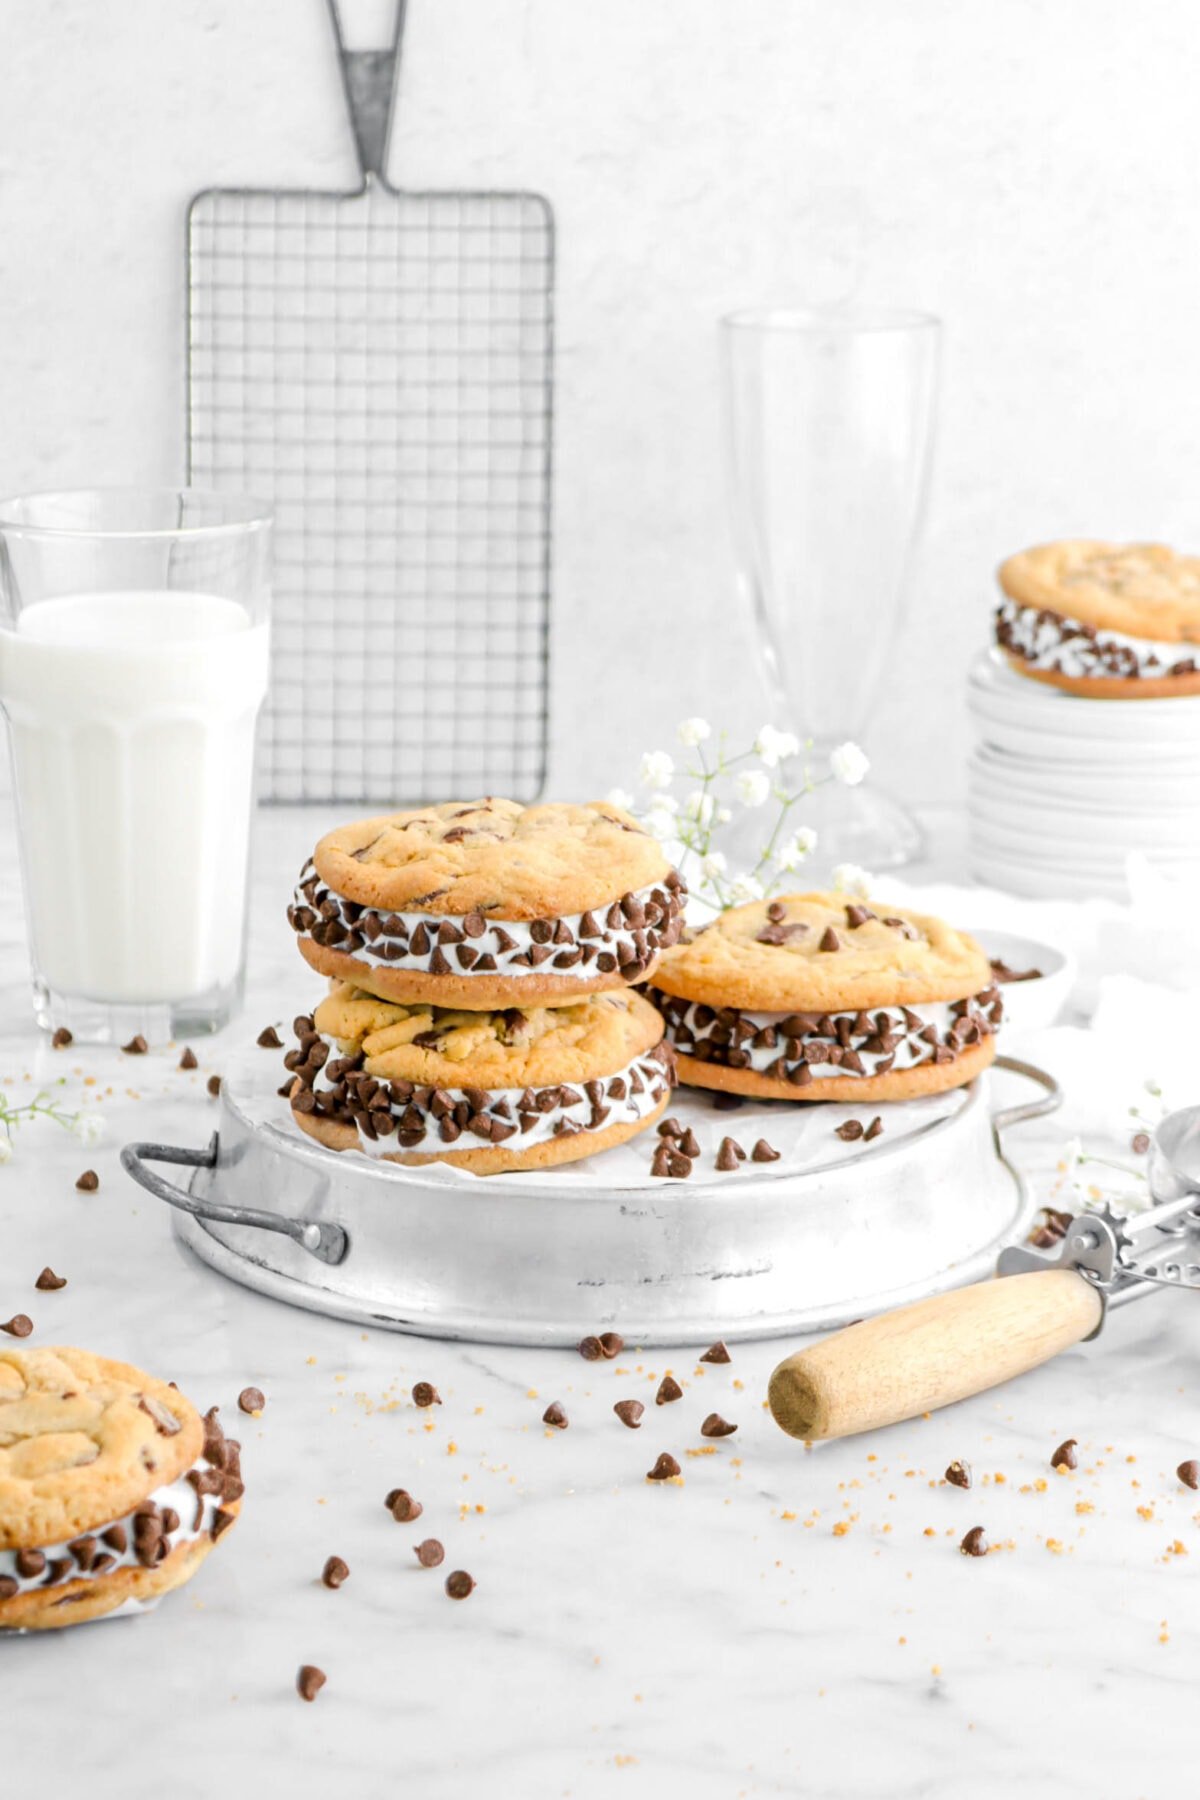 angled shot of stacked ice cream sandwich cookies on pie plate with ice cream scoop beside, glass of milk, white flowers, and chocolate chips scattered around